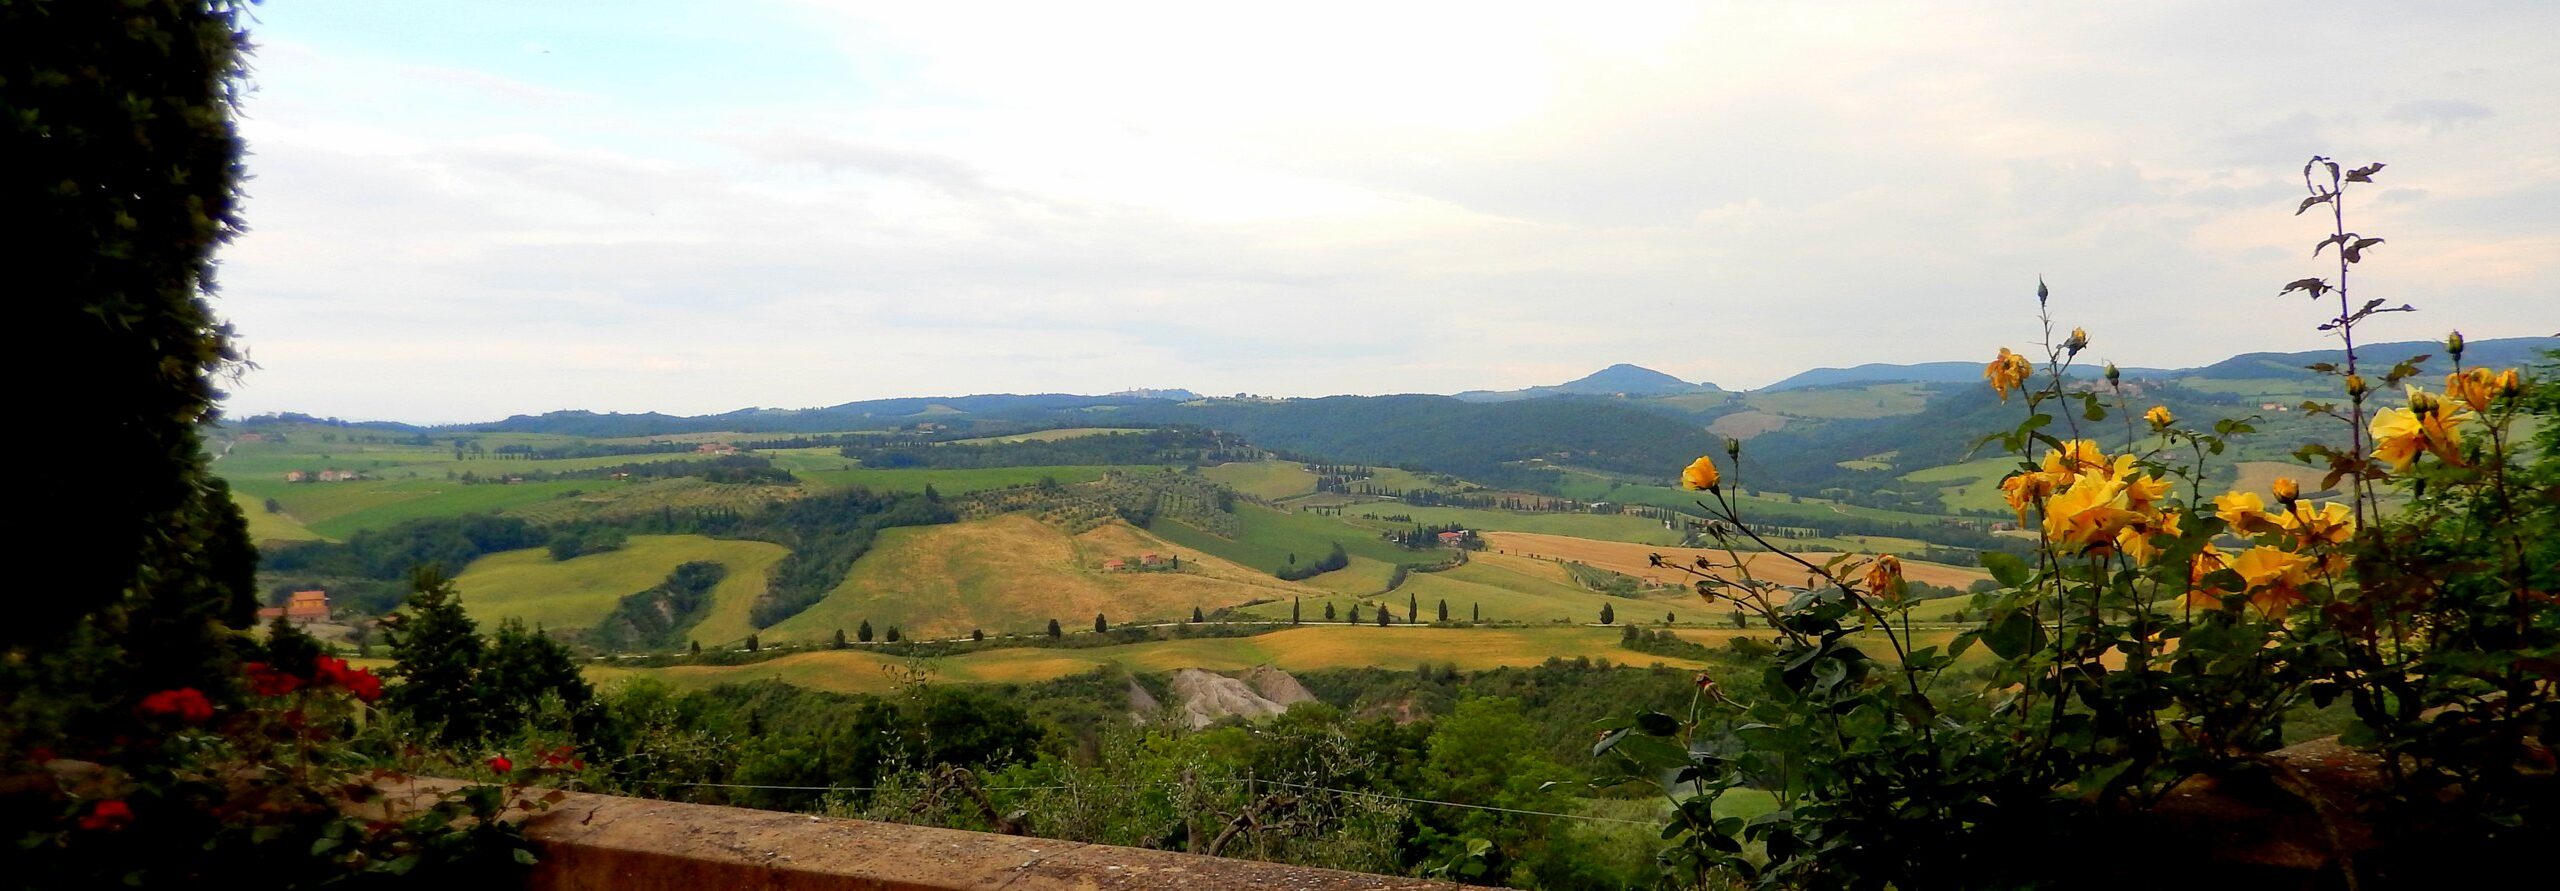 Enjoy views of the Tuscany hills on your bike rides on this guided bike tour in Tuscany